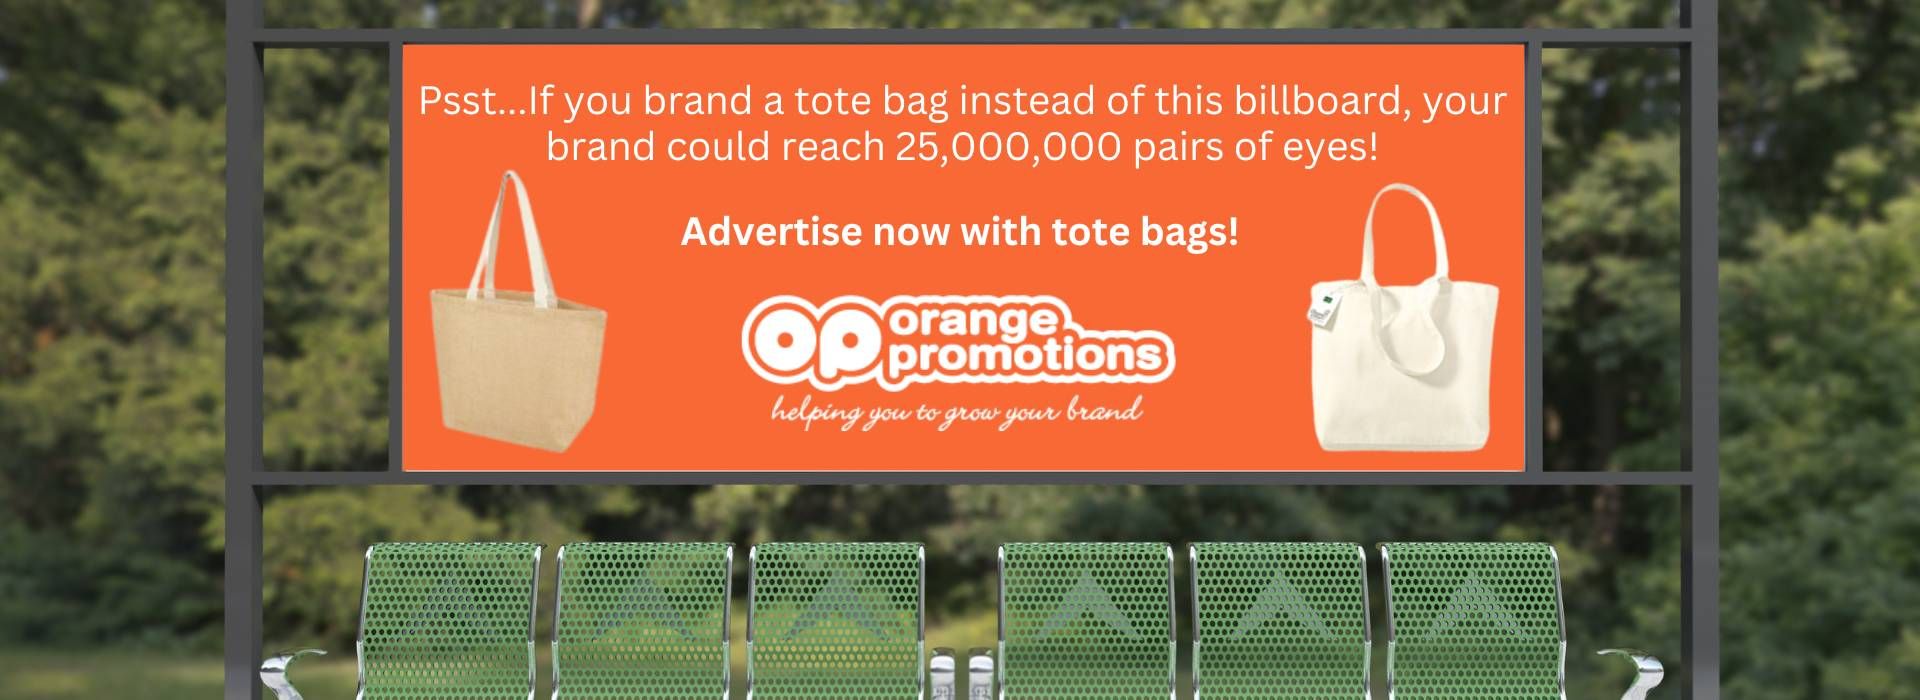 Promotional Tote Bags Benefits | Orange Promotions